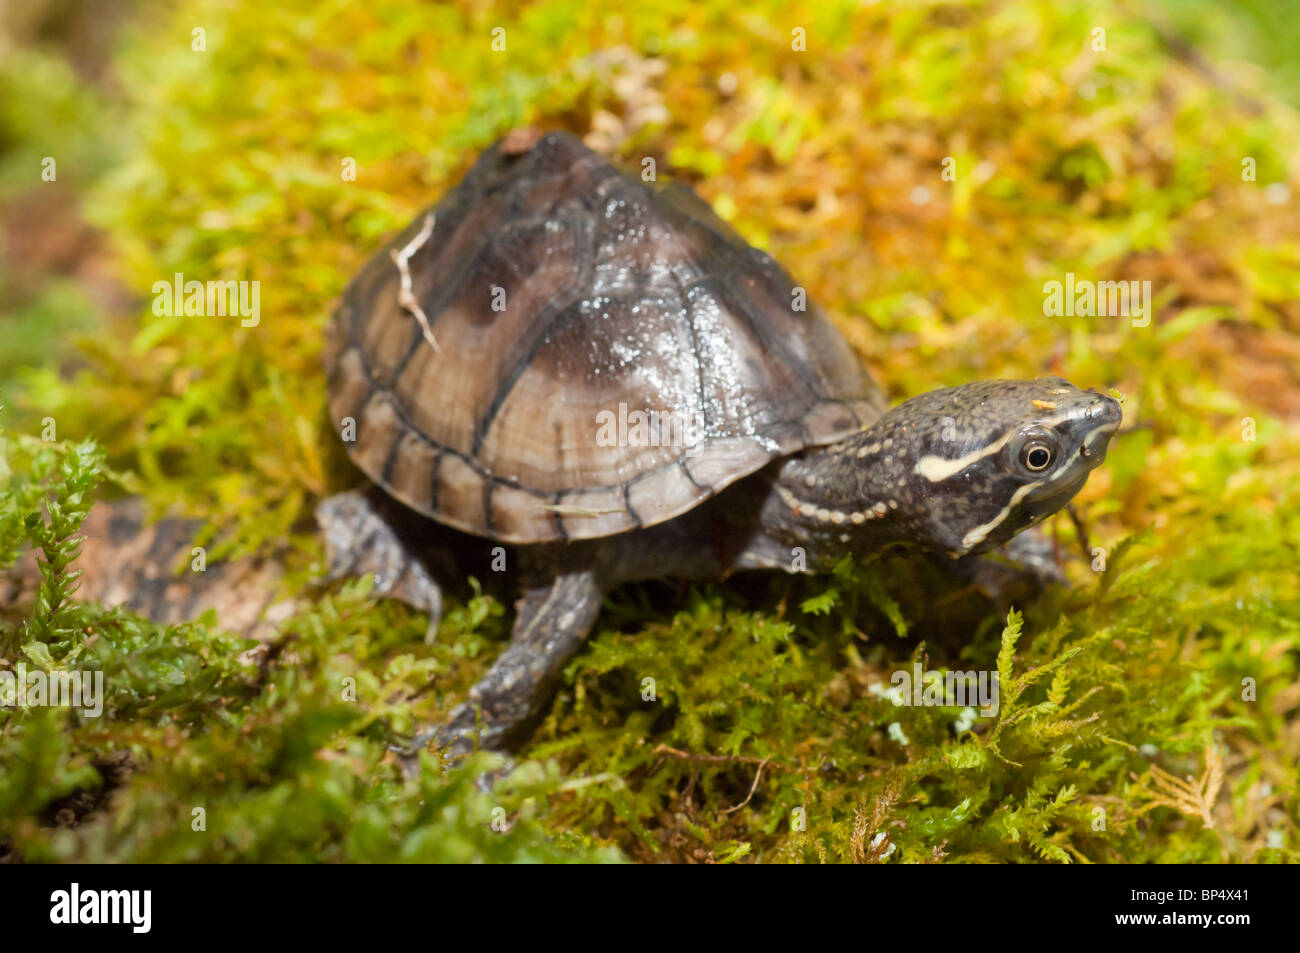 Common musk turtle, stinkpot, Sternotherus odoratus, native to southeastern Canada and eastern United States Stock Photo